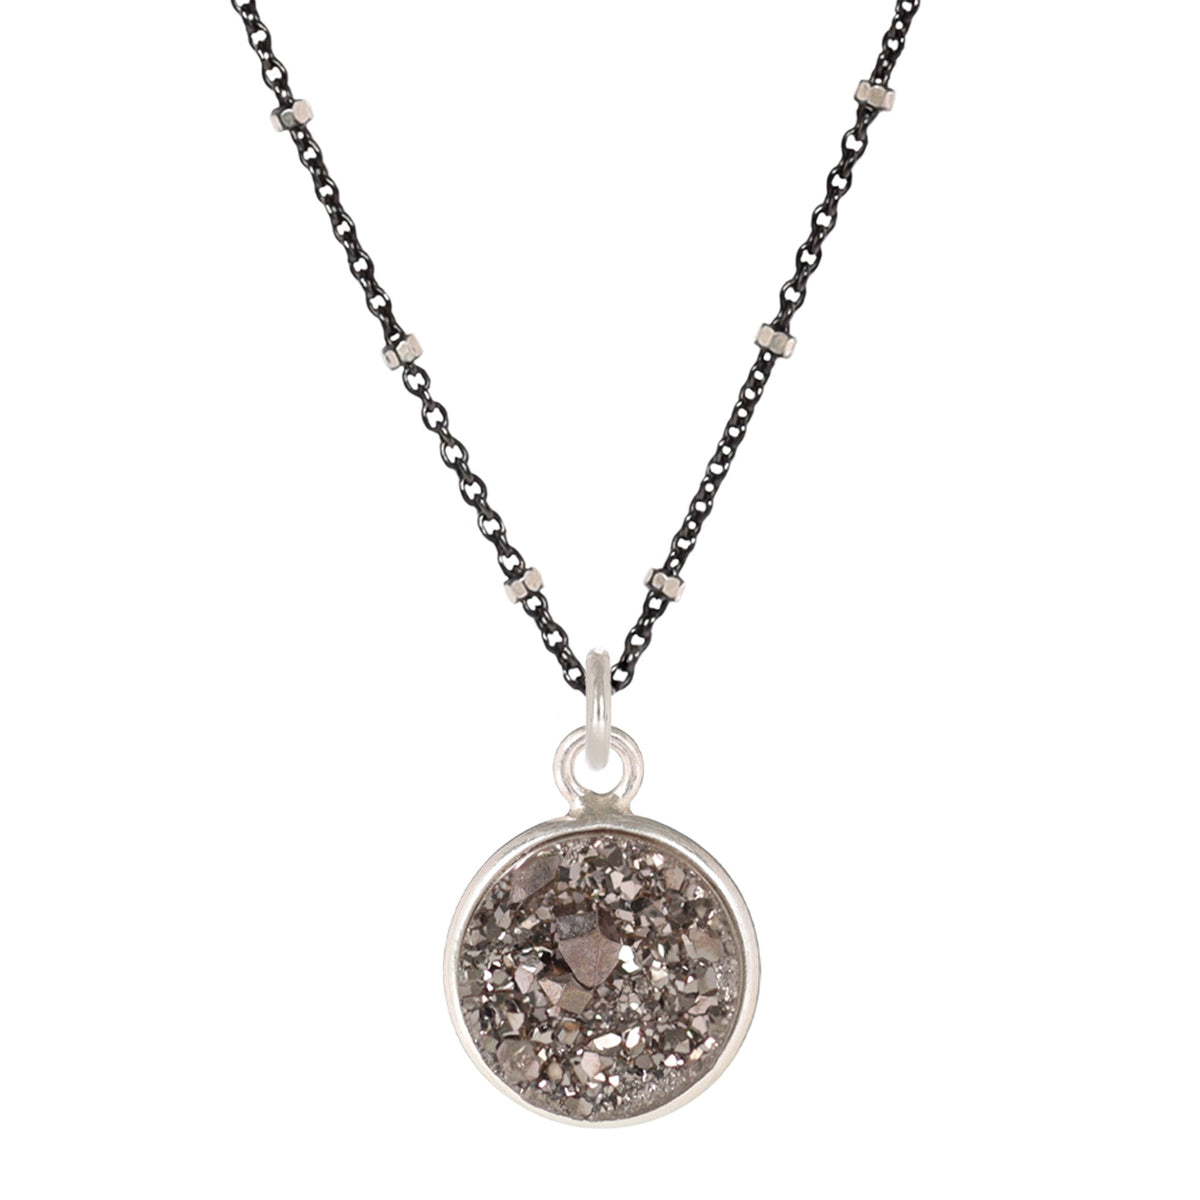 Oxidized Sterling Silver Chain with 11MM Grey Druzy in Sterling Bezel